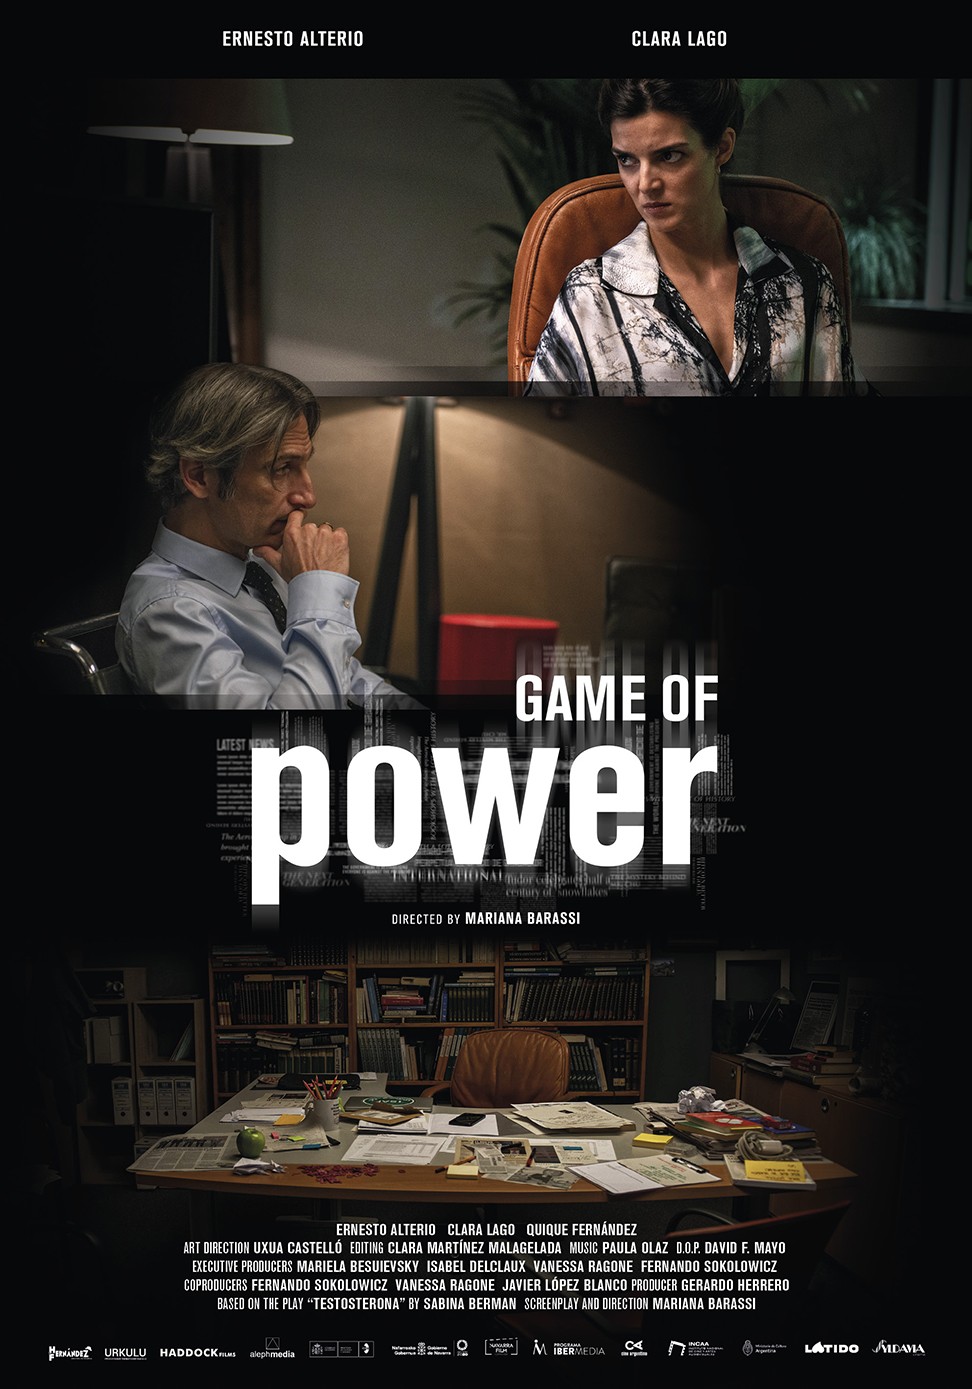 GAME OF POWER